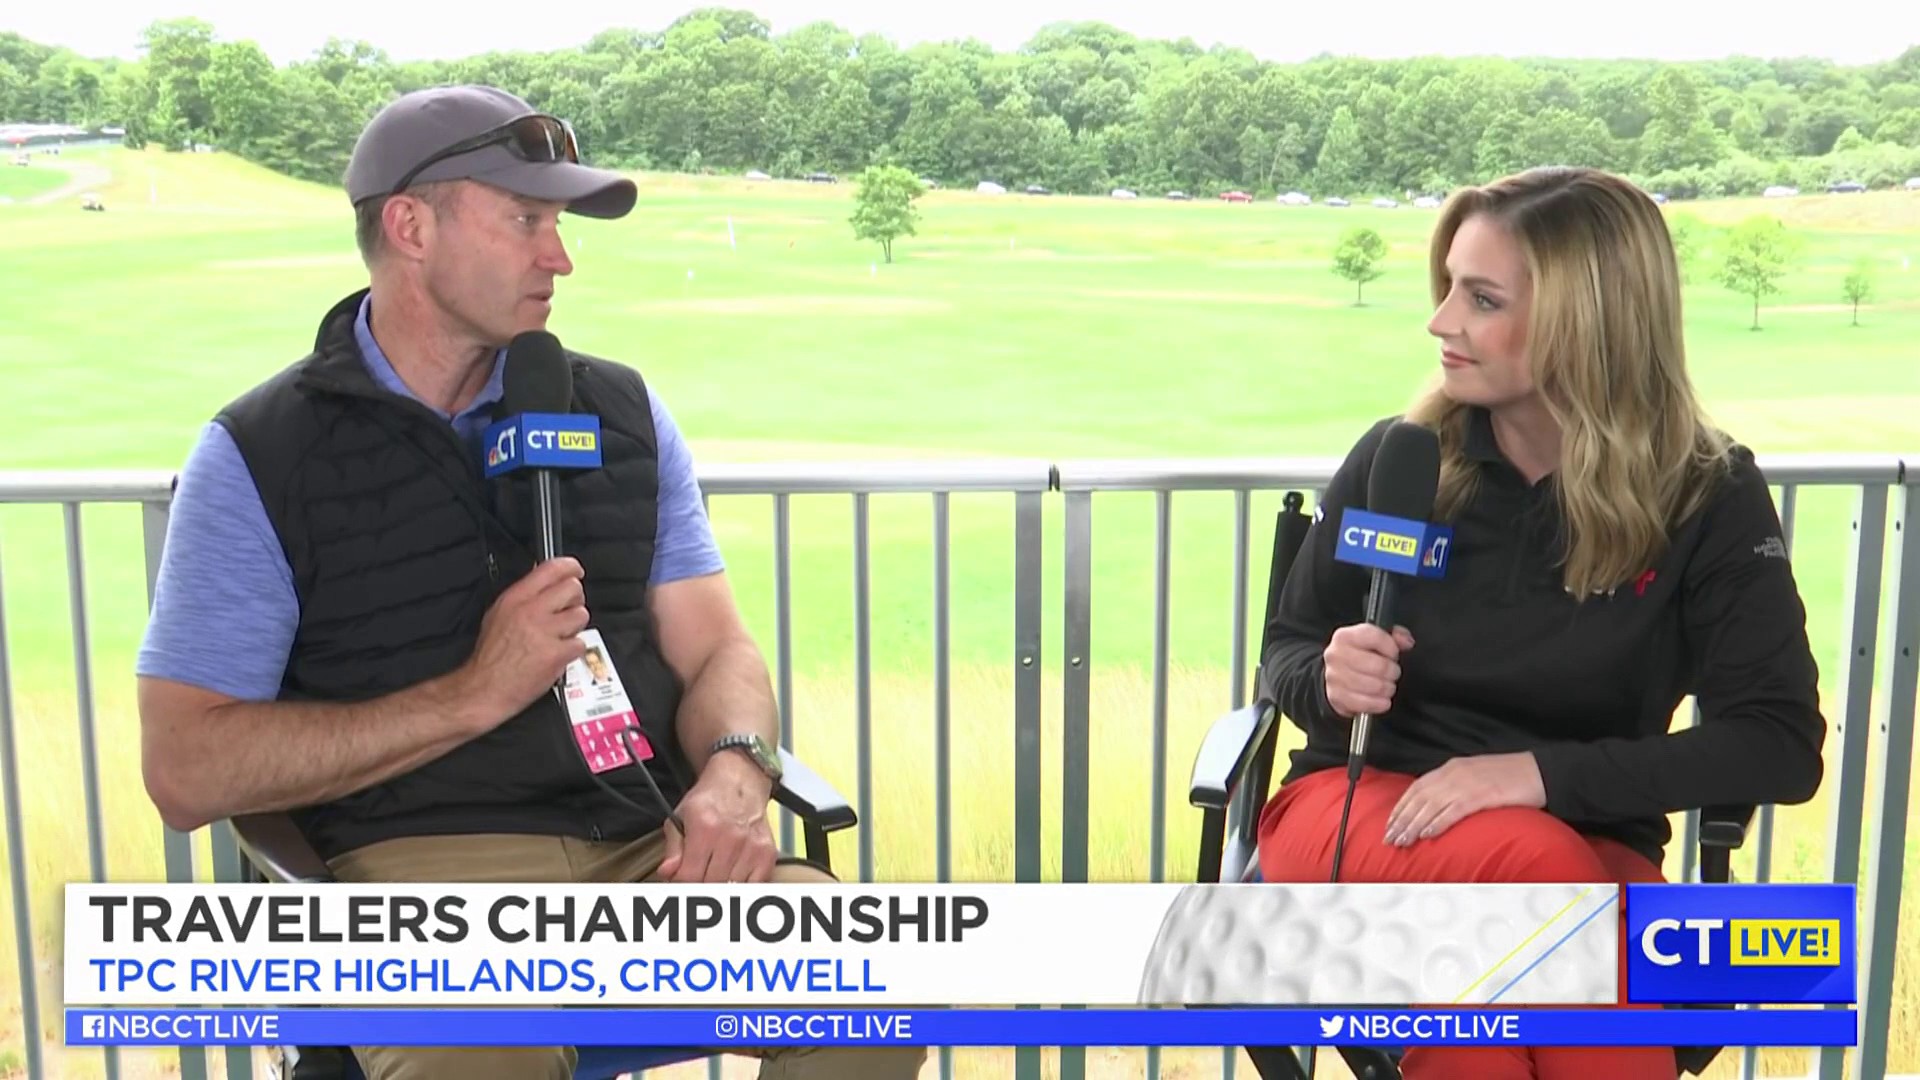 CT LIVE! A Look at This Years Travelers Championship